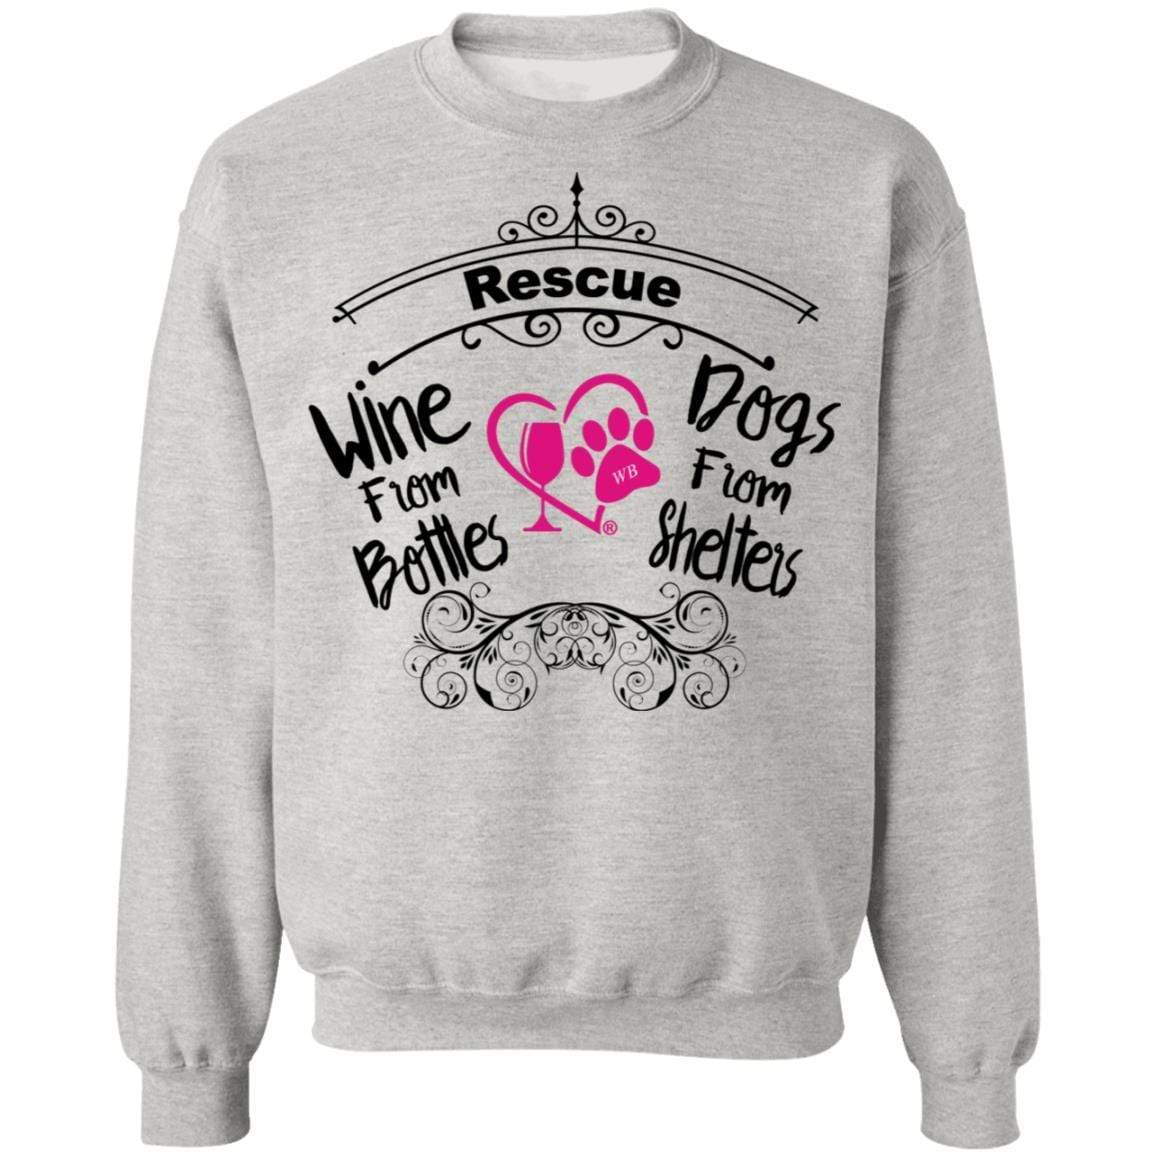 Sweatshirts Ash / S Winey Bitches Co "Rescue Wine from Bottles, Dogs from Shelters" Crewneck Pullover Sweatshirt  8 oz. WineyBitchesCo